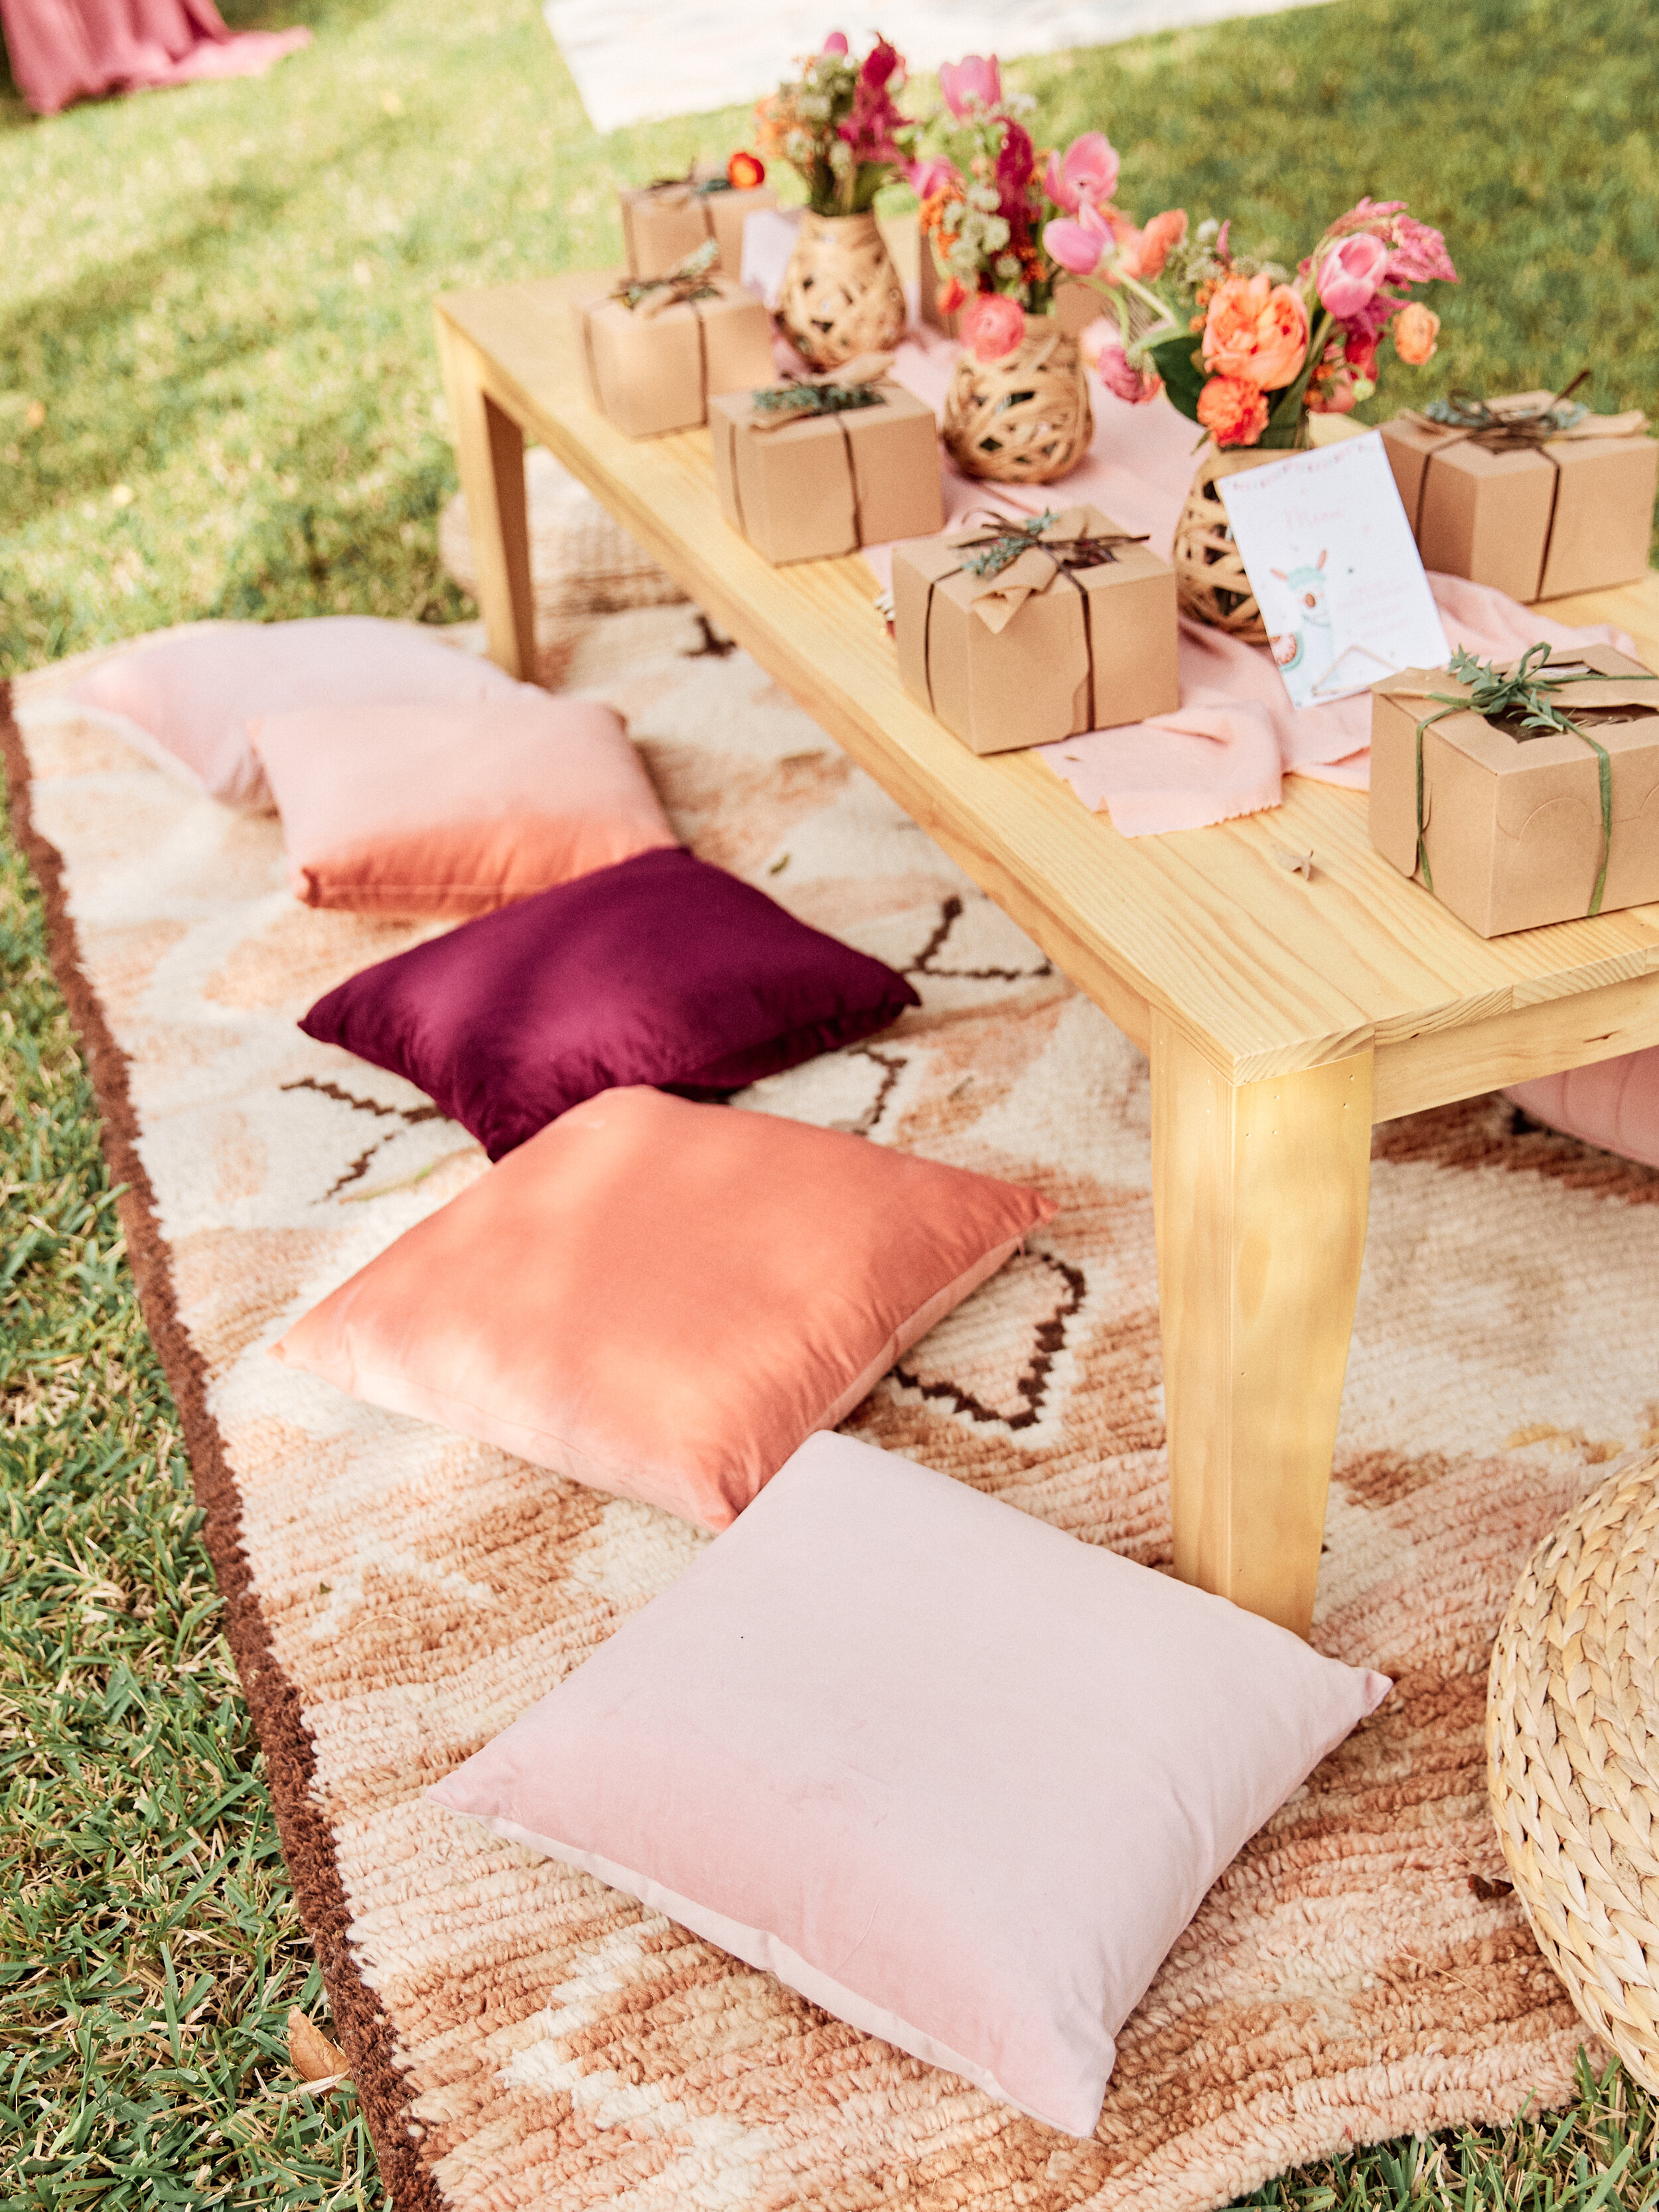 Comfortable seating for a picnic party - get details and more party inspiration now at minteventdesign.com!